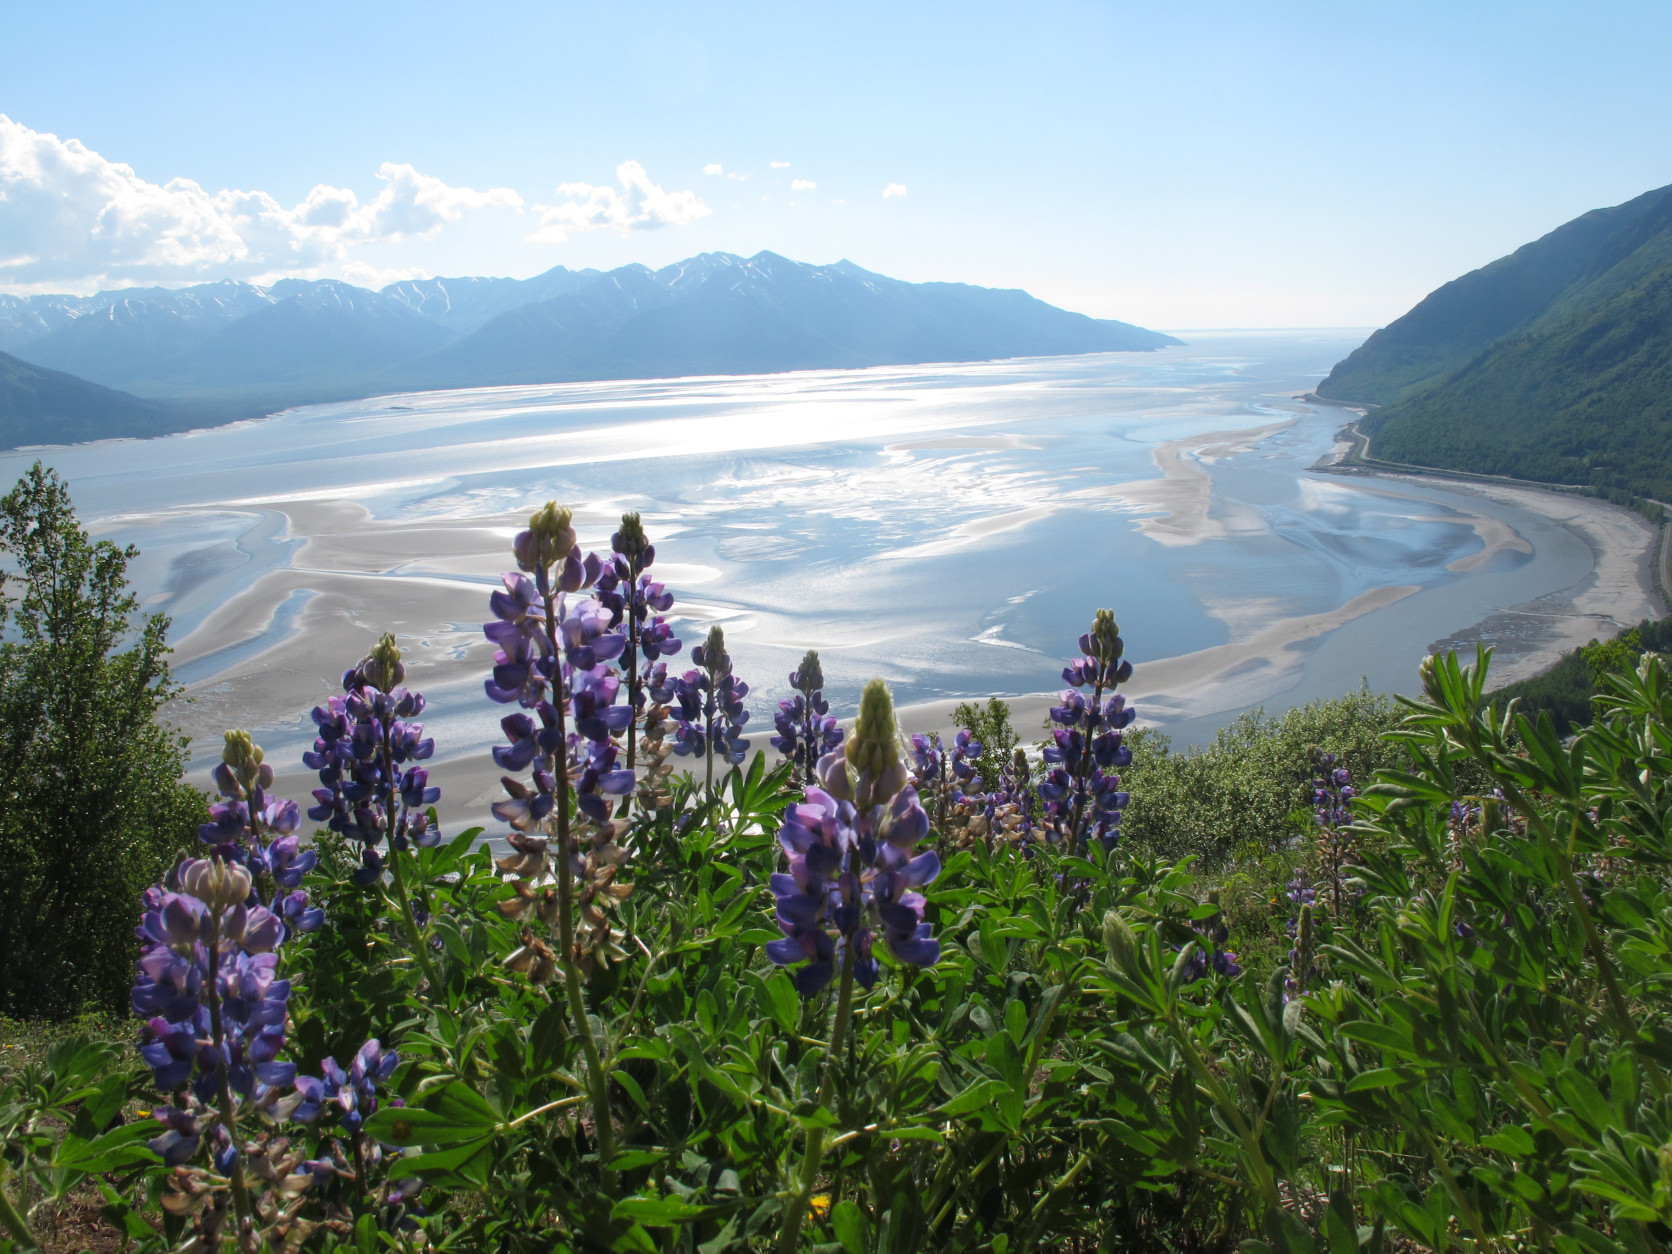 Lupine grows along Bird Ridge Trail on Thursday, June 13, 2013, in Anchorage, Alaska. June is prime alpine wildflower season along the Chugach State Park trail that overlooks Turnagain Arm.The trail begins 25 miles south of downtown Anchorage.  (AP Photo/Dan Joling)